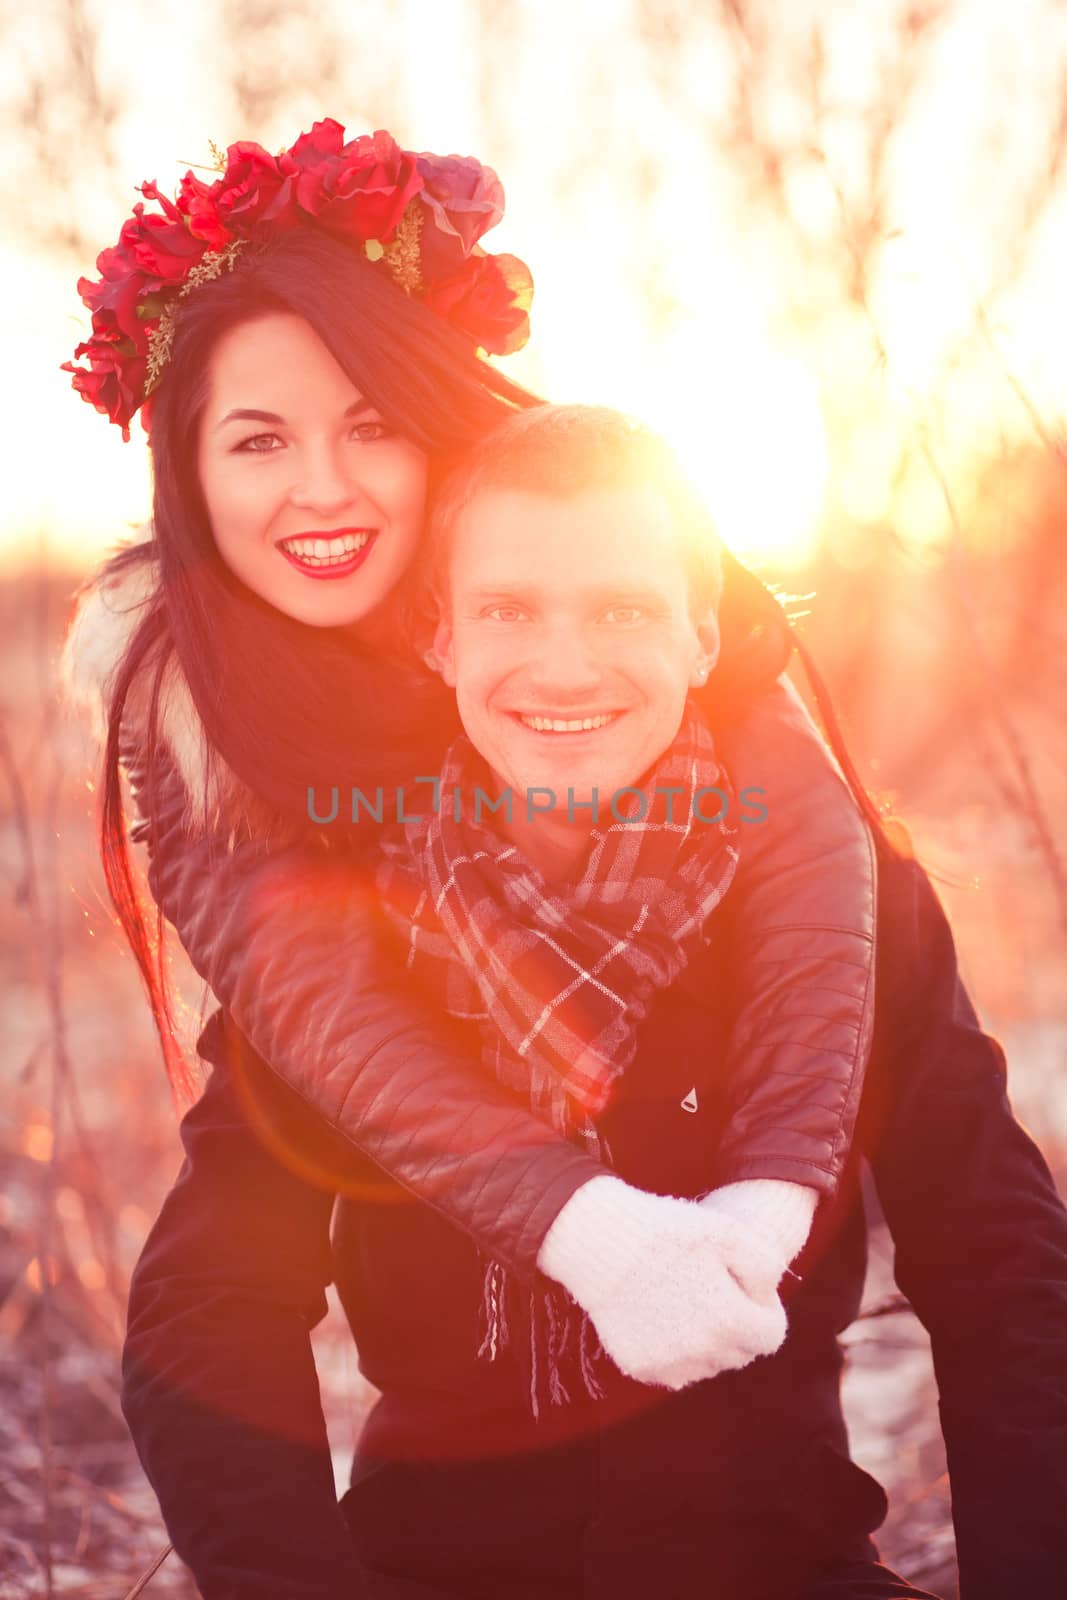 Beautiful young pair are smiling and having fun in sunlight